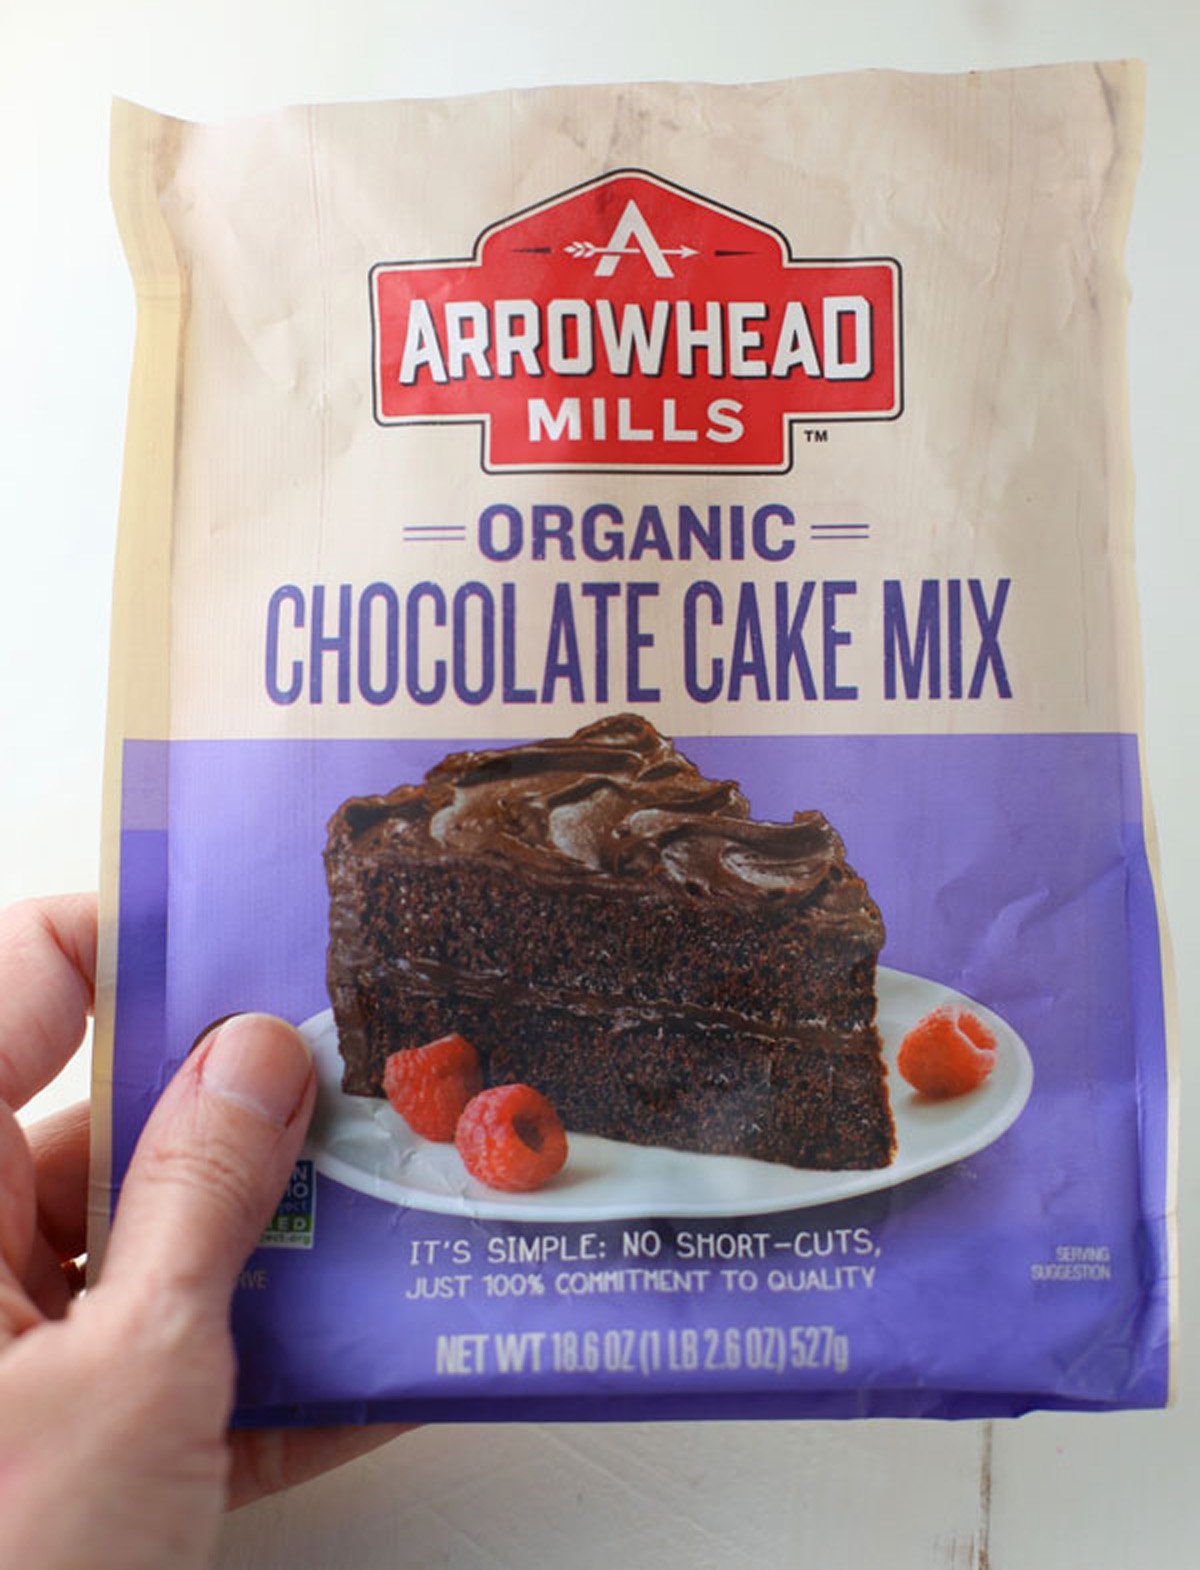 Cake mix package for chocolate cake.